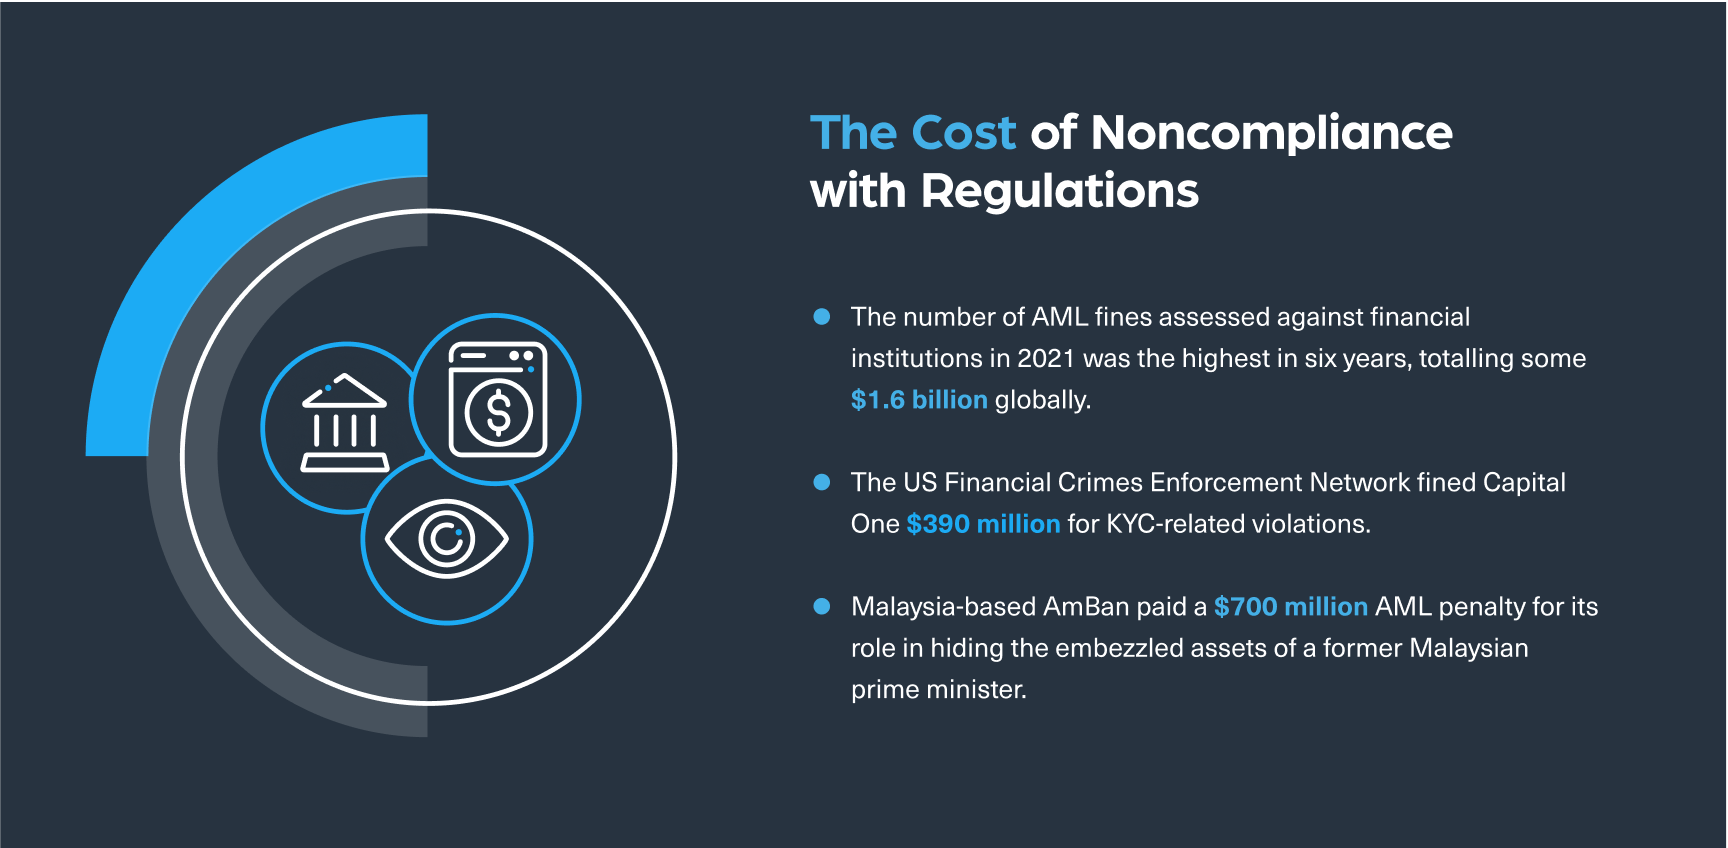 The cost of noncompliance with regulations - in numbers.